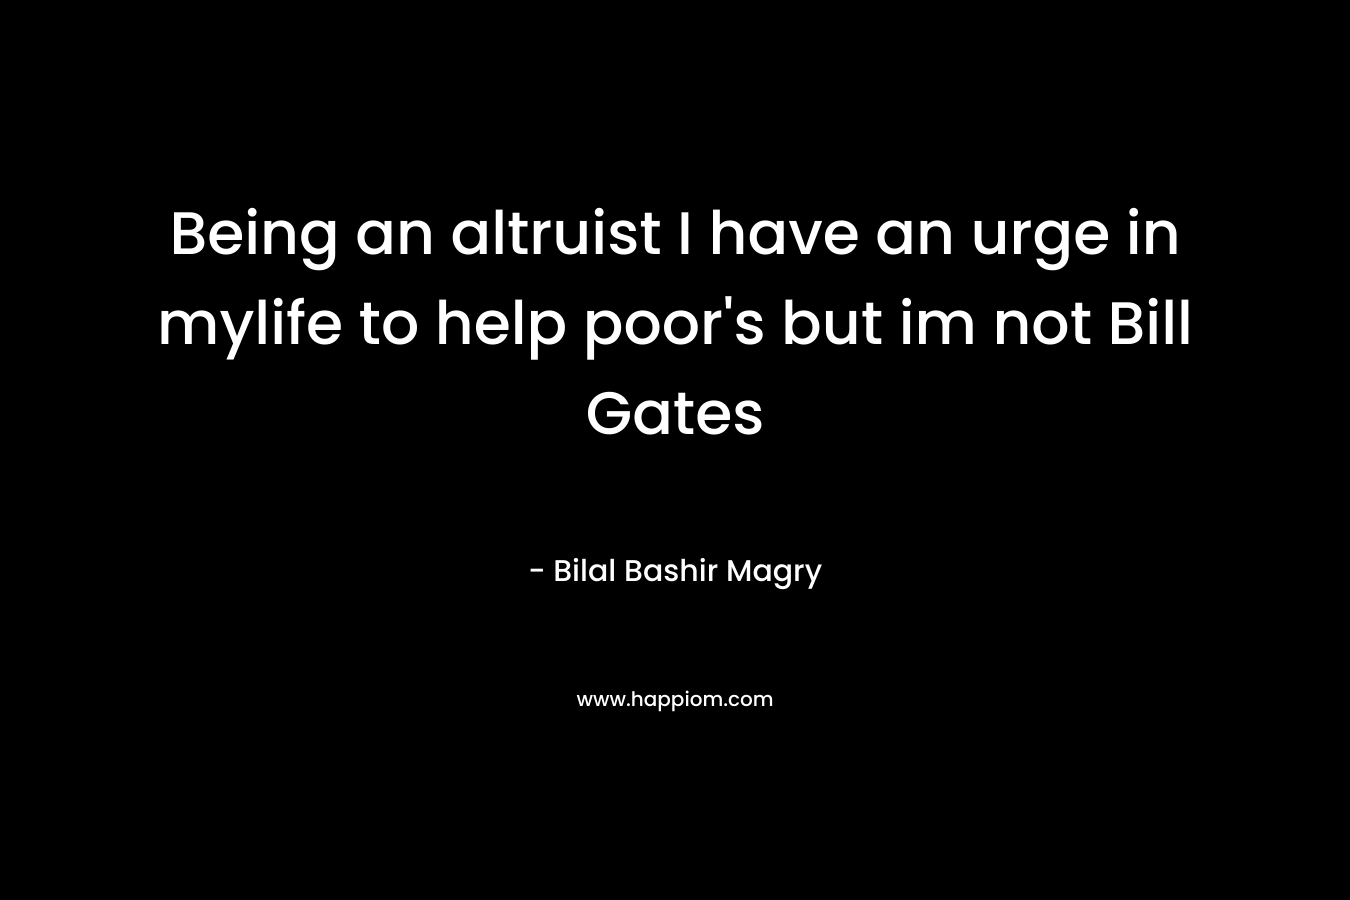 Being an altruist I have an urge in mylife to help poor's but im not Bill Gates